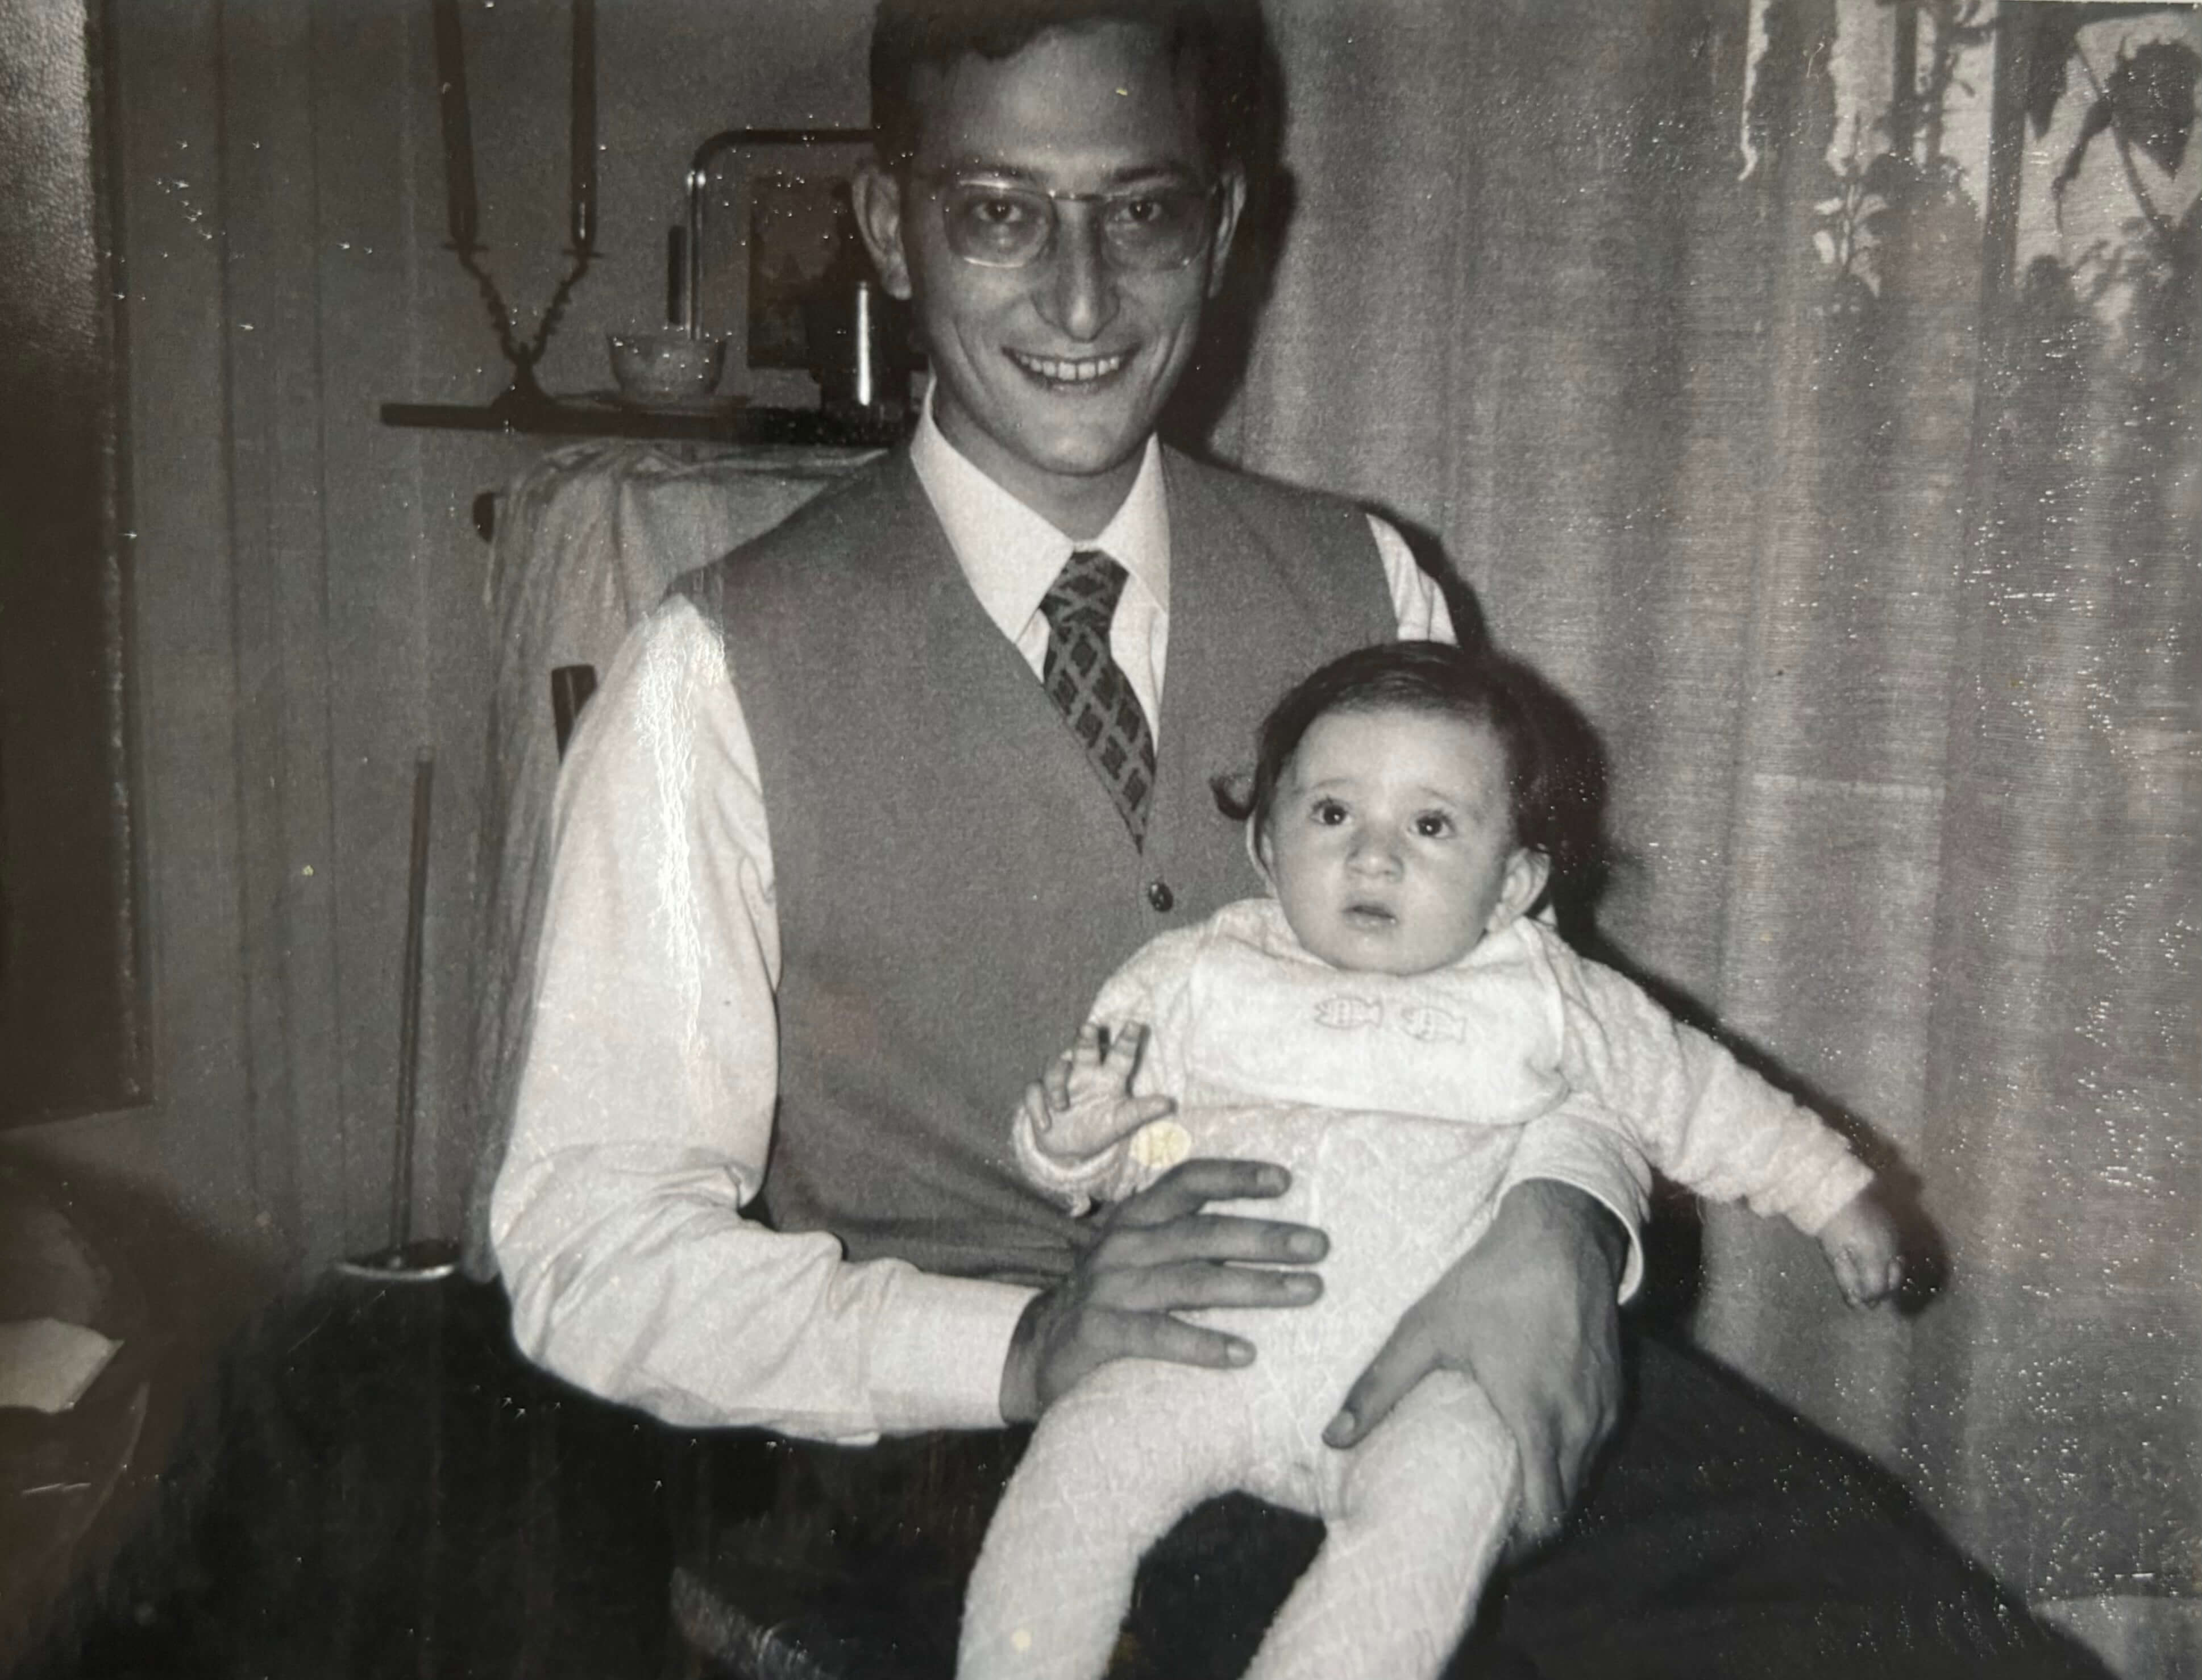 Bruno holding his first daughter in 1970